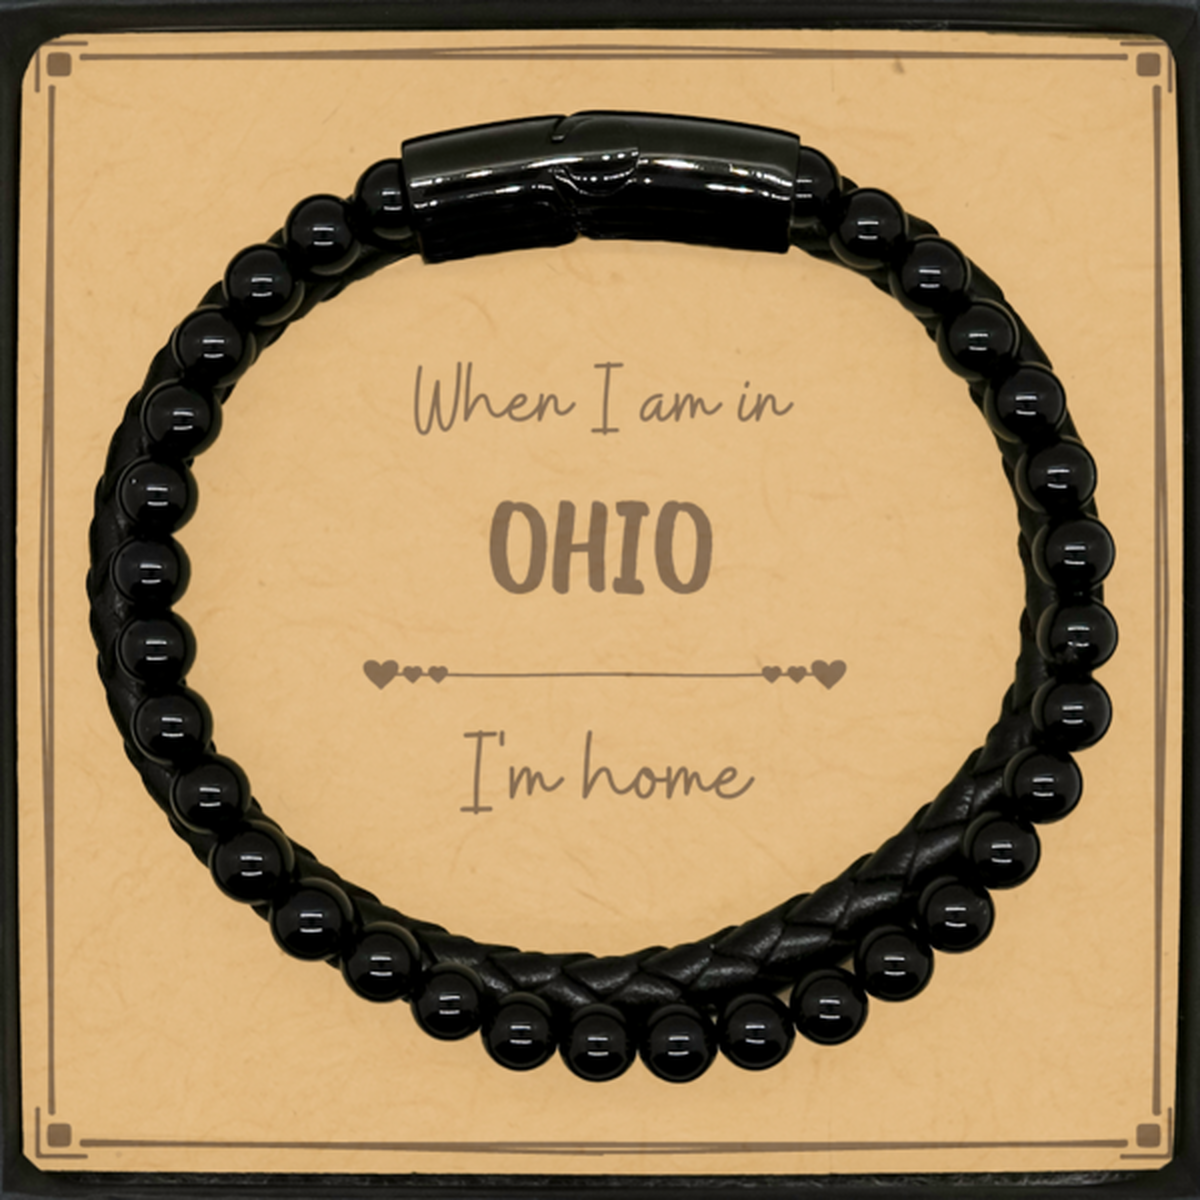 When I am in Ohio I'm home Stone Leather Bracelets, Message Card Gifts For Ohio, State Ohio Birthday Gifts for Friends Coworker